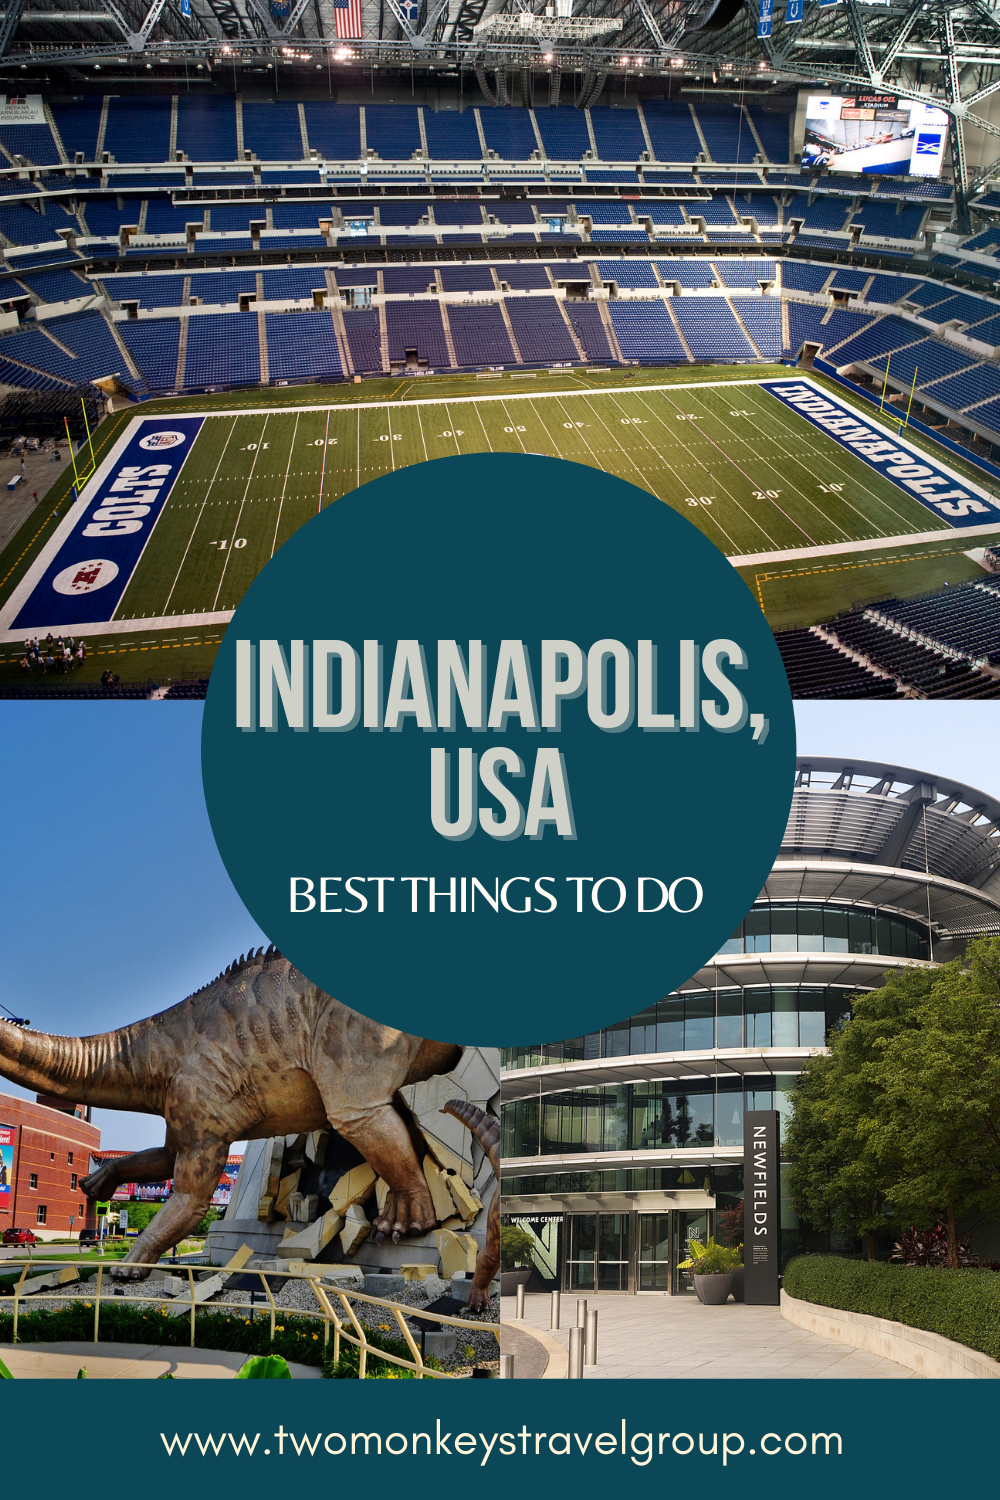 Top 5 things to do in Indianapolis, USA and where to stay